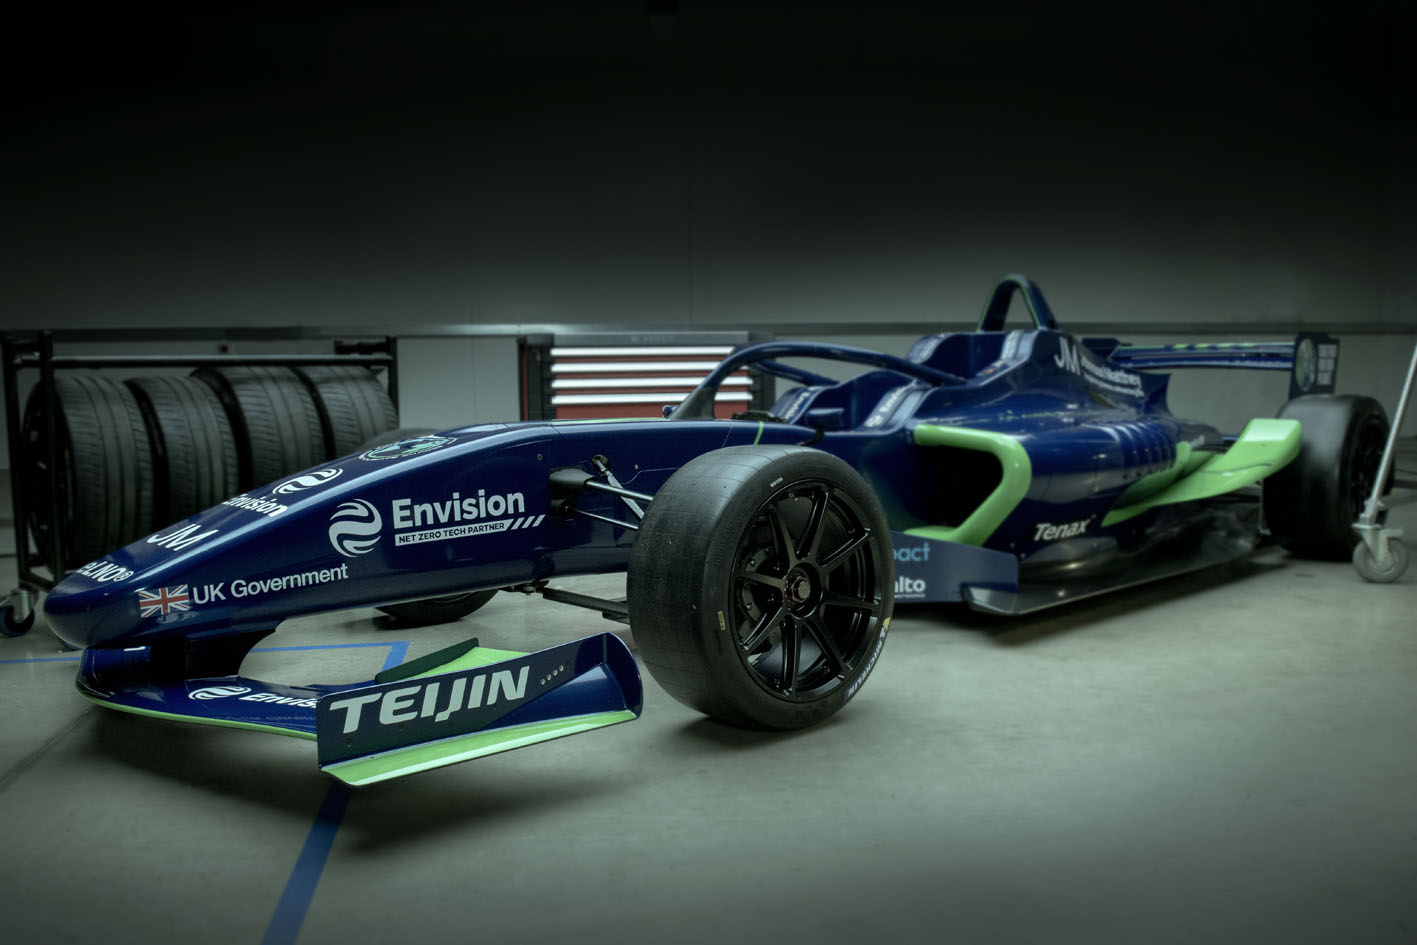 The world’s first electric two-seater Formula One race car developed by Envision Racing Team in partnership with Johnson Matthey. © Teijin